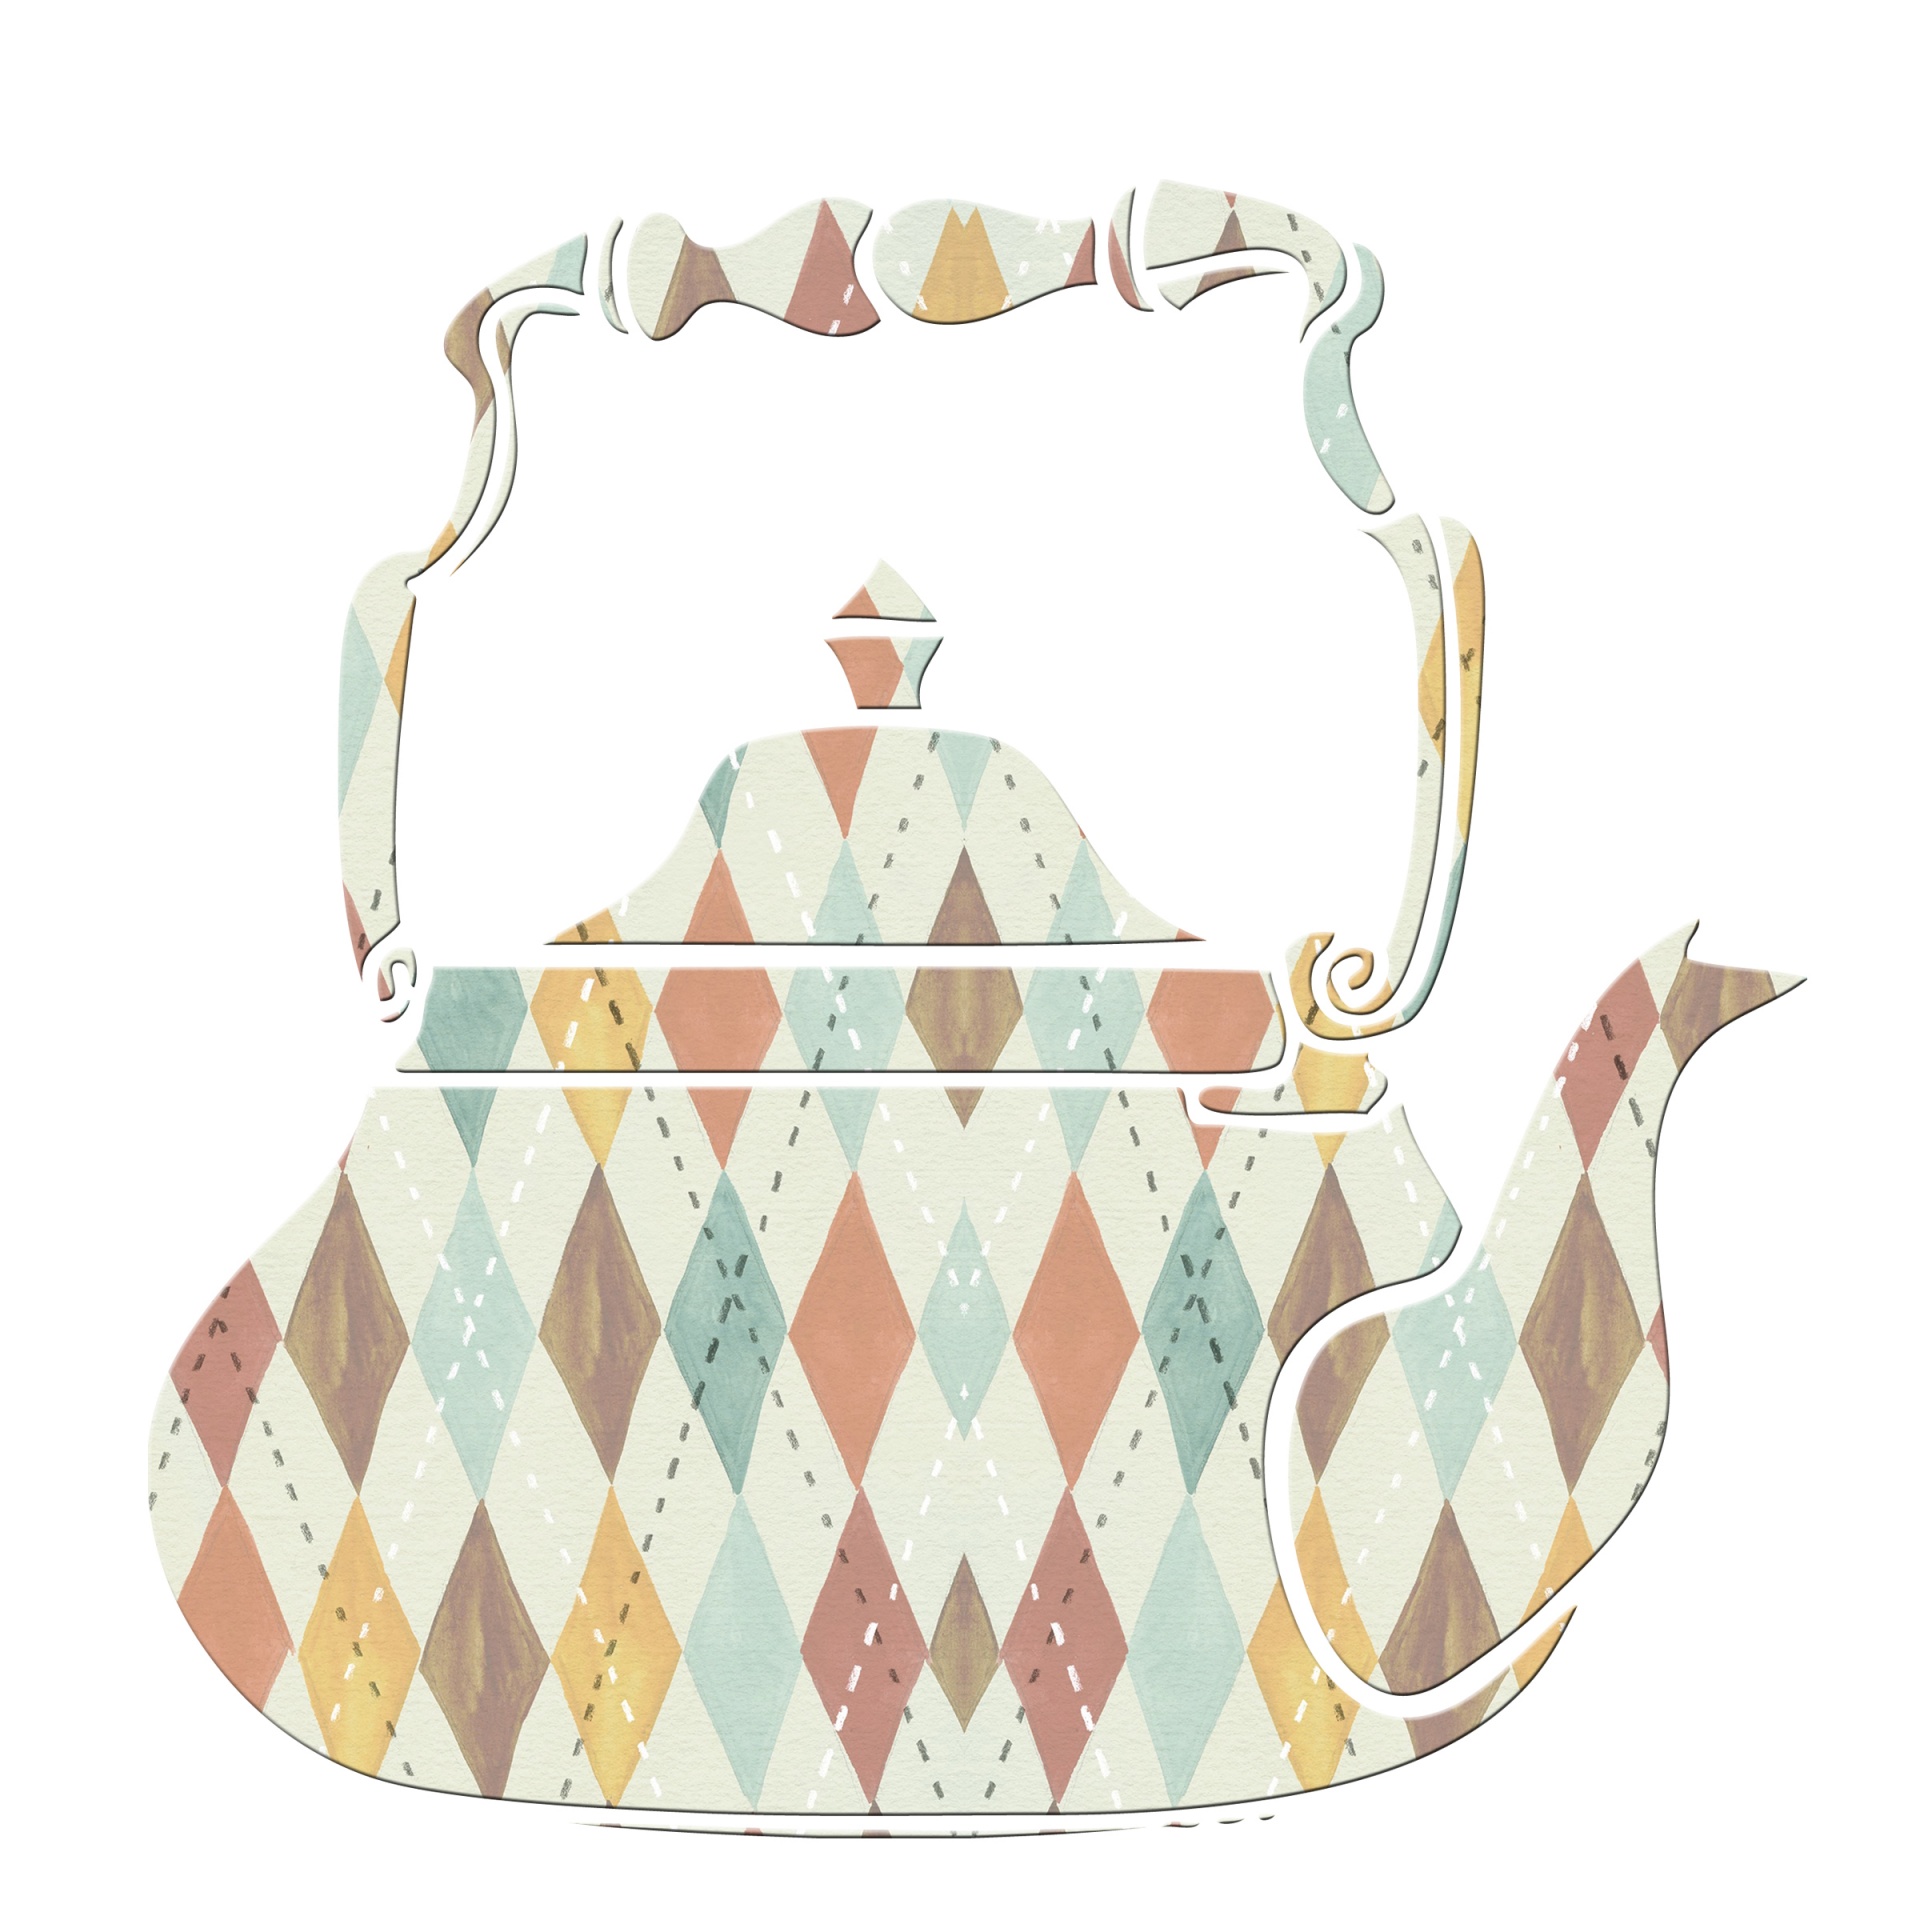 Vintage style kettle with argyle pattern isolated on white